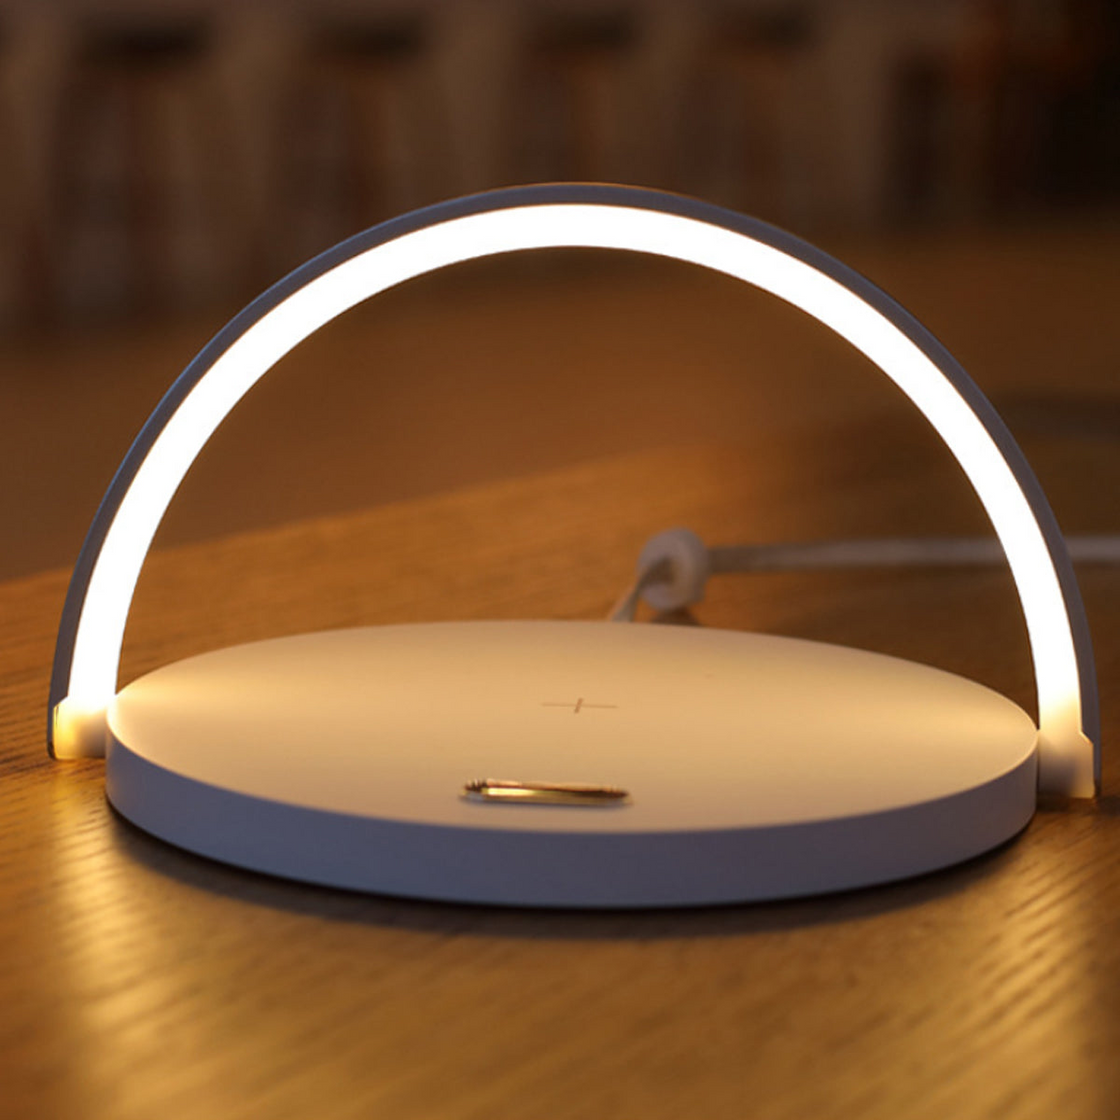 Moonlit Soft Glow LED Light, Wireless Phone Charger And Stand - Stylish, Versatile, and Convenient